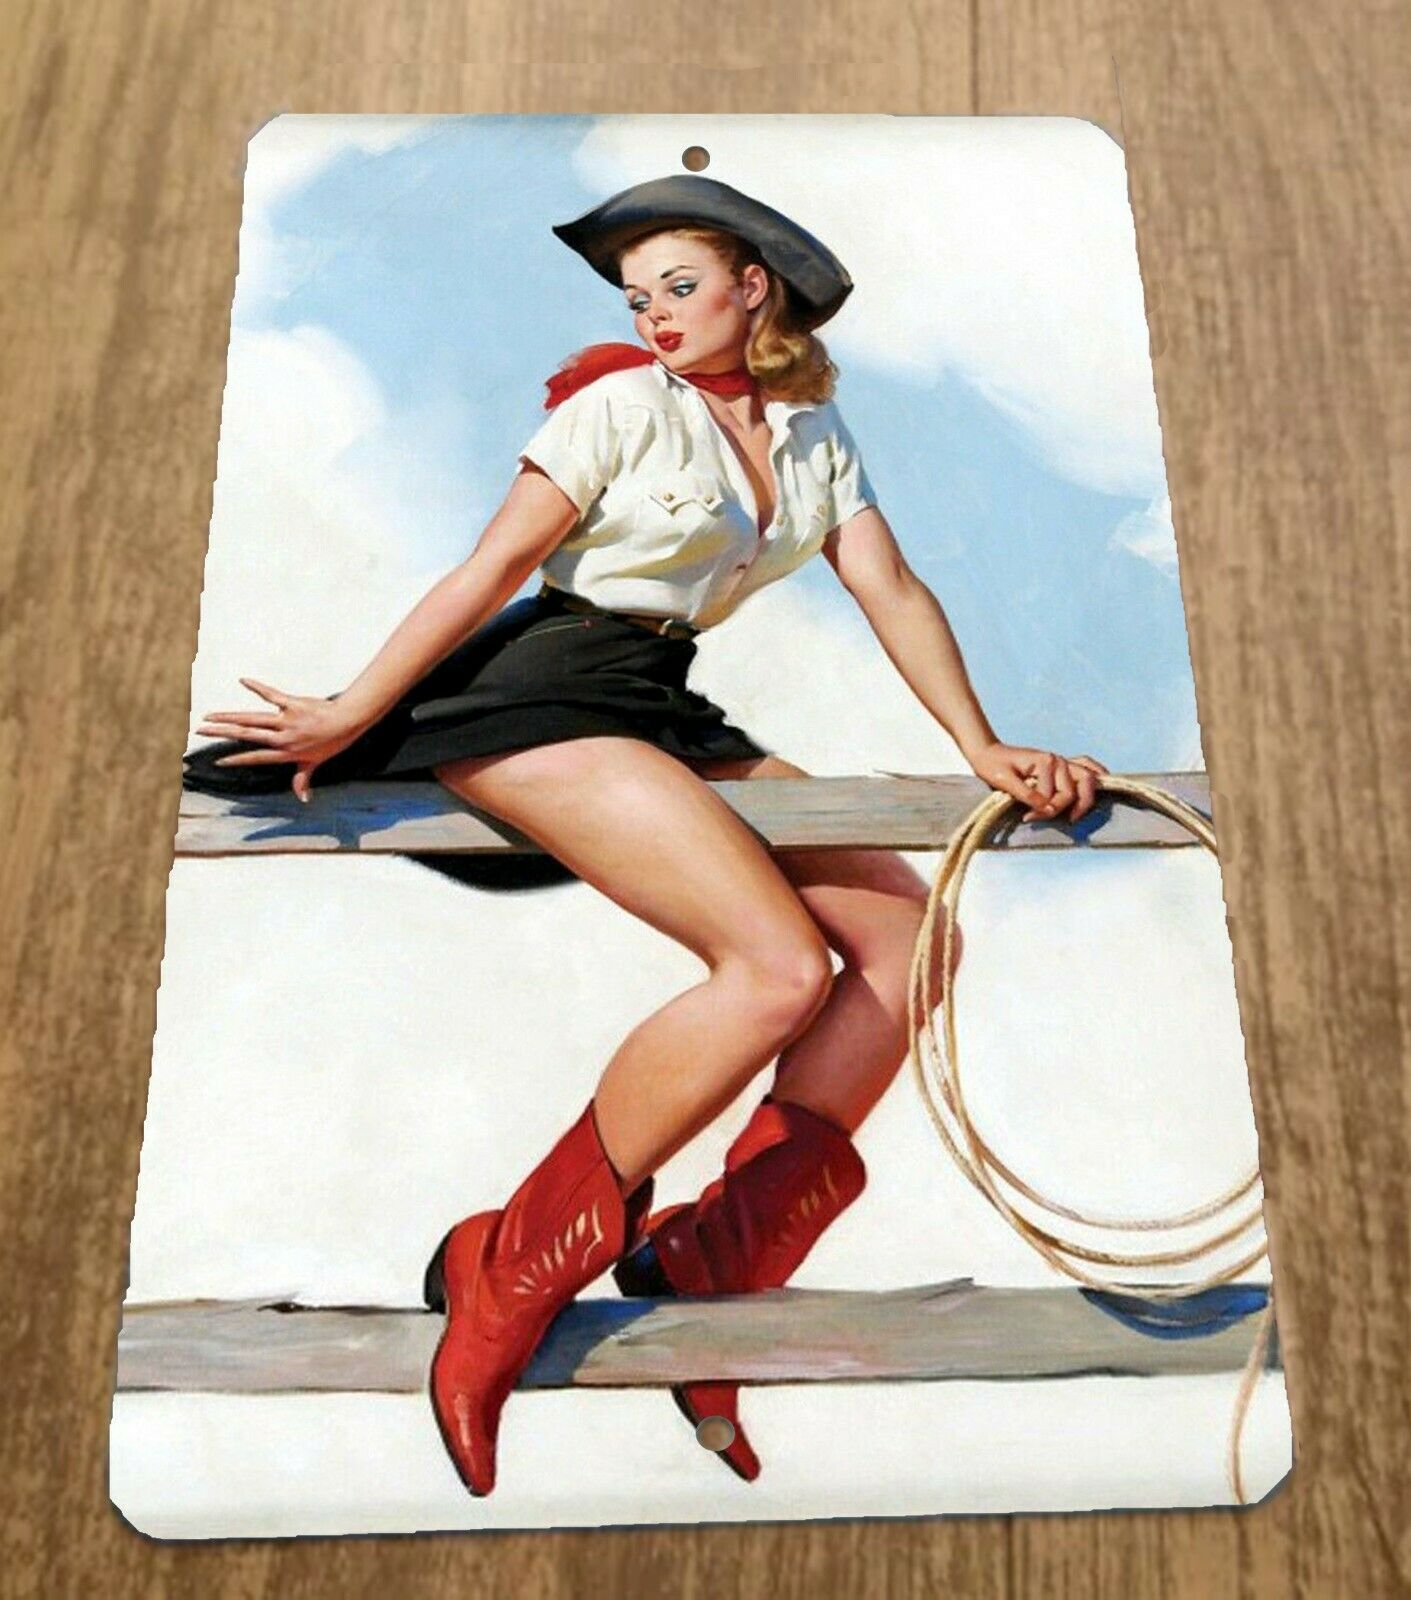 Cowgirl Sitting on Fence with Lasso Pinup Girl Art 8x12 Metal Wall Vintage Misc Poster Sign